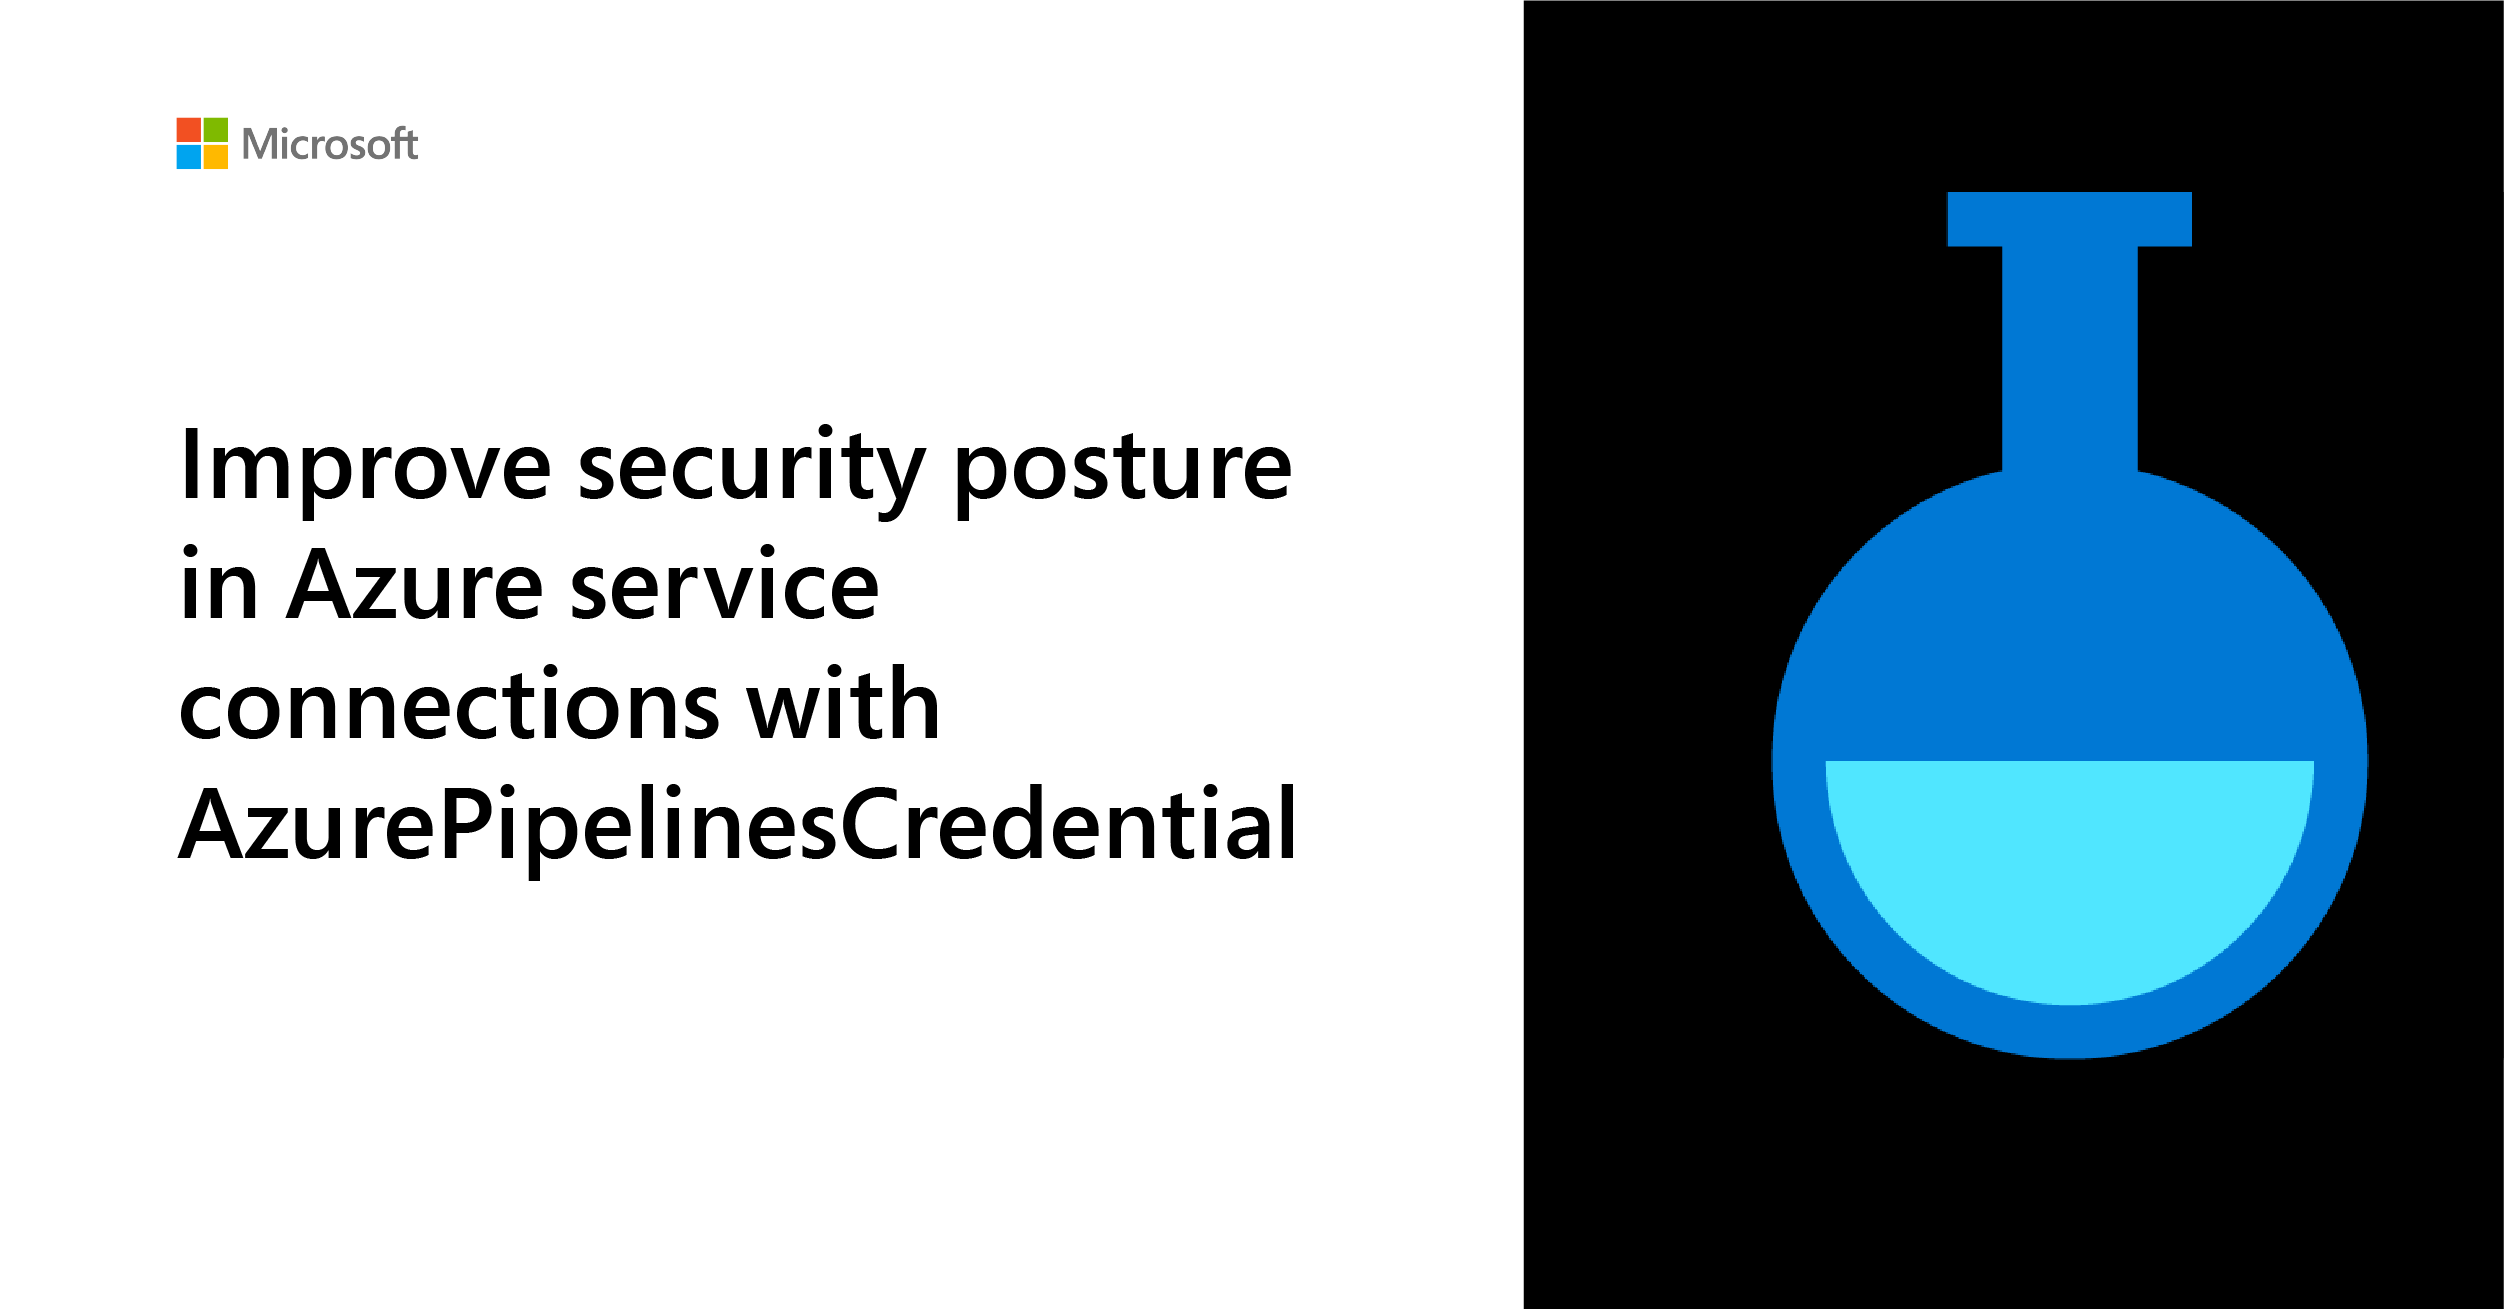 Improve security posture in Azure service connections with AzurePipelinesCredential